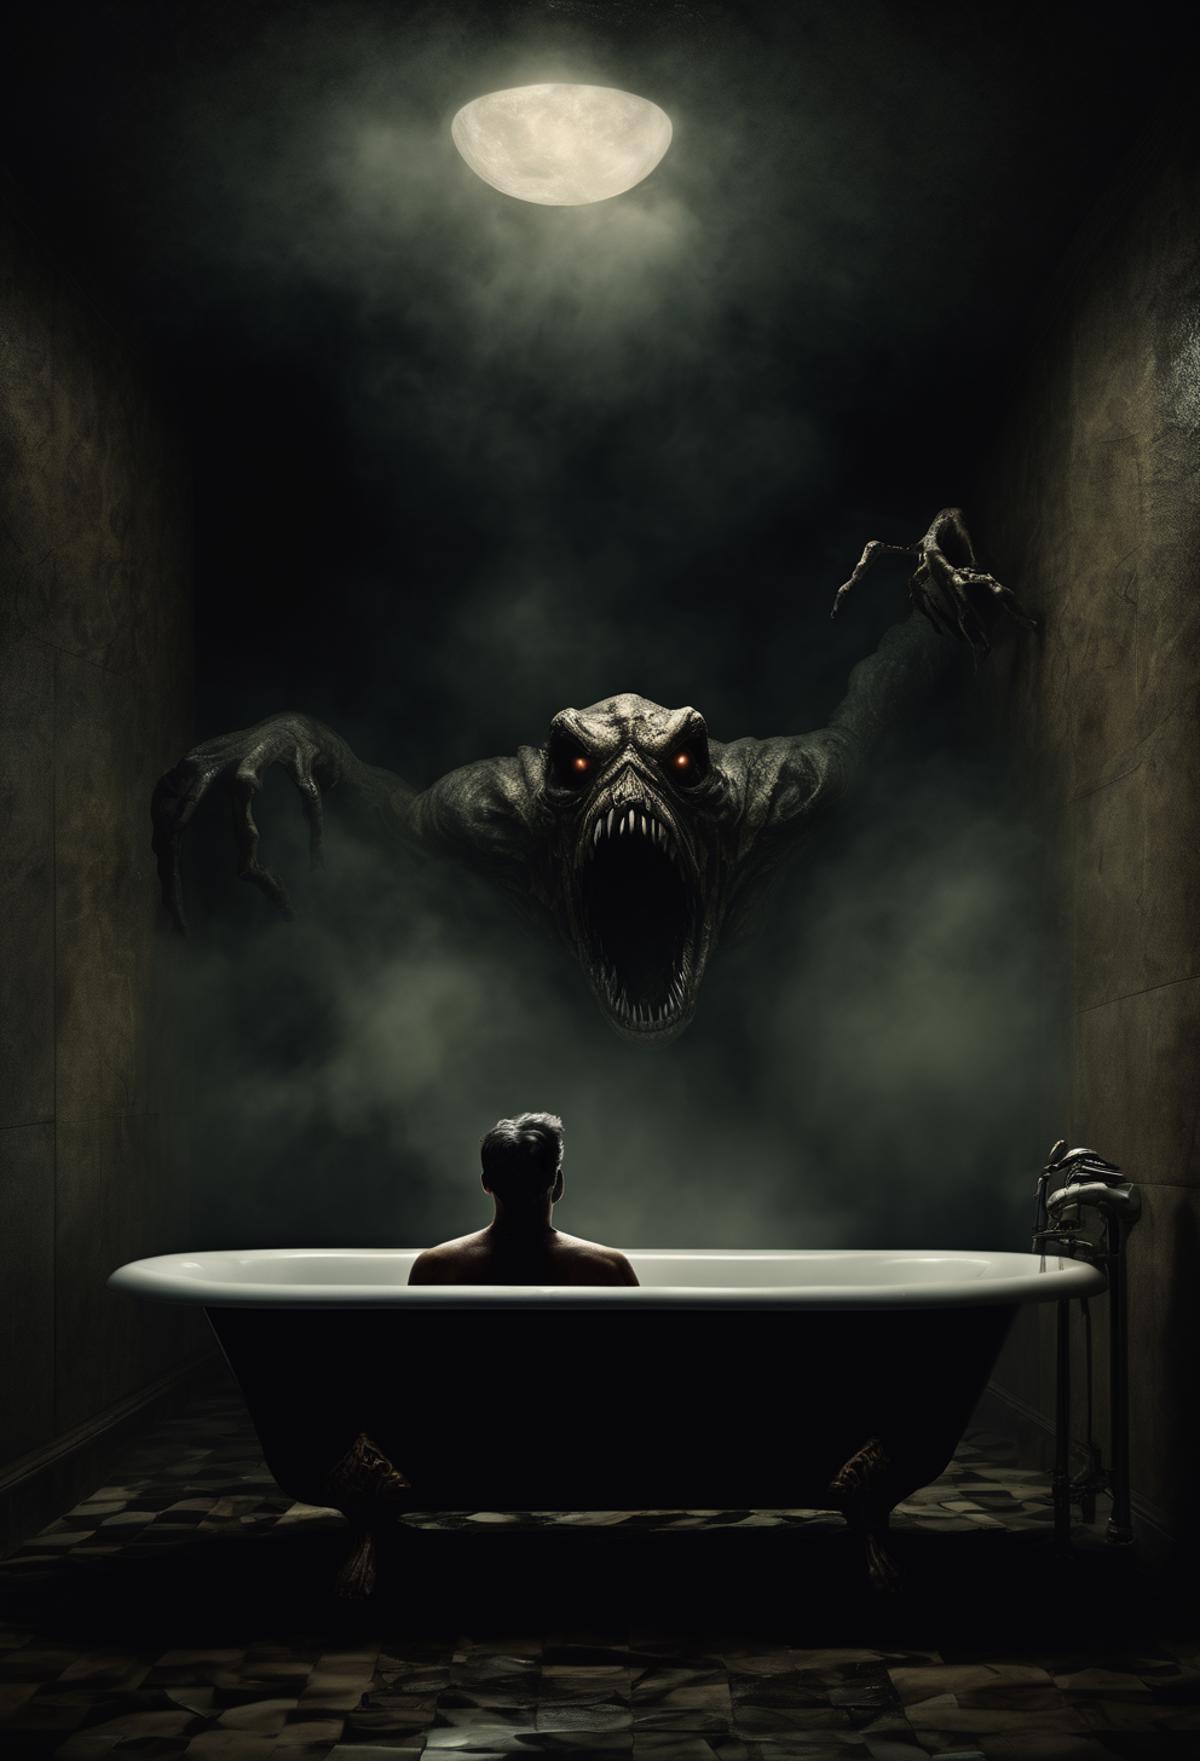 A person sitting in a bathtub with a monster looming above.